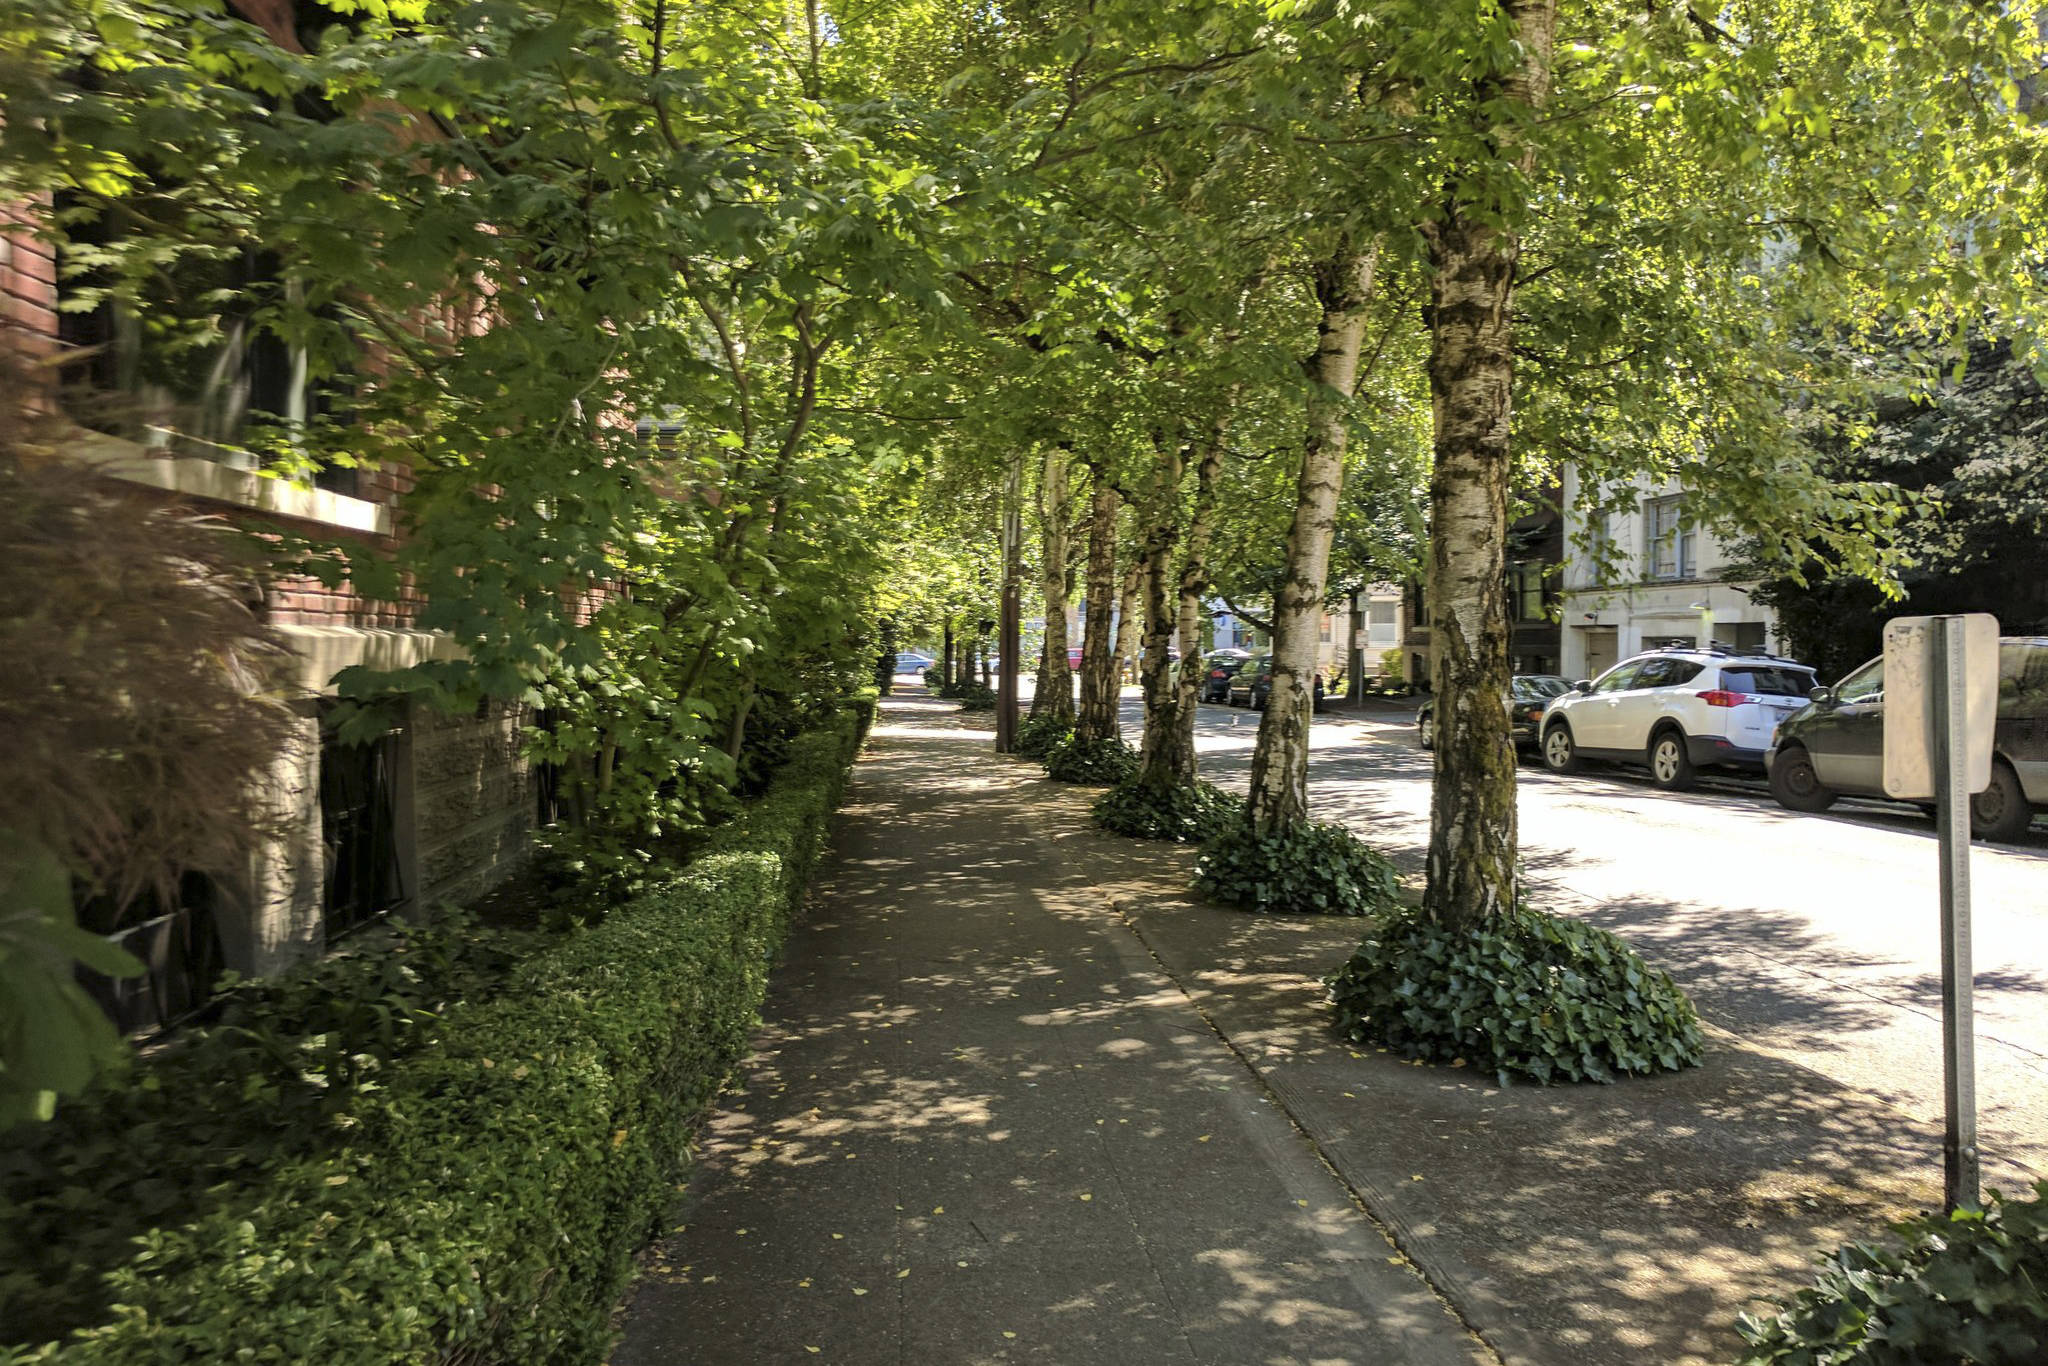 Tree canopy provides shade to pedestrians and improves air quality by filtering out harmful air pollutants. 